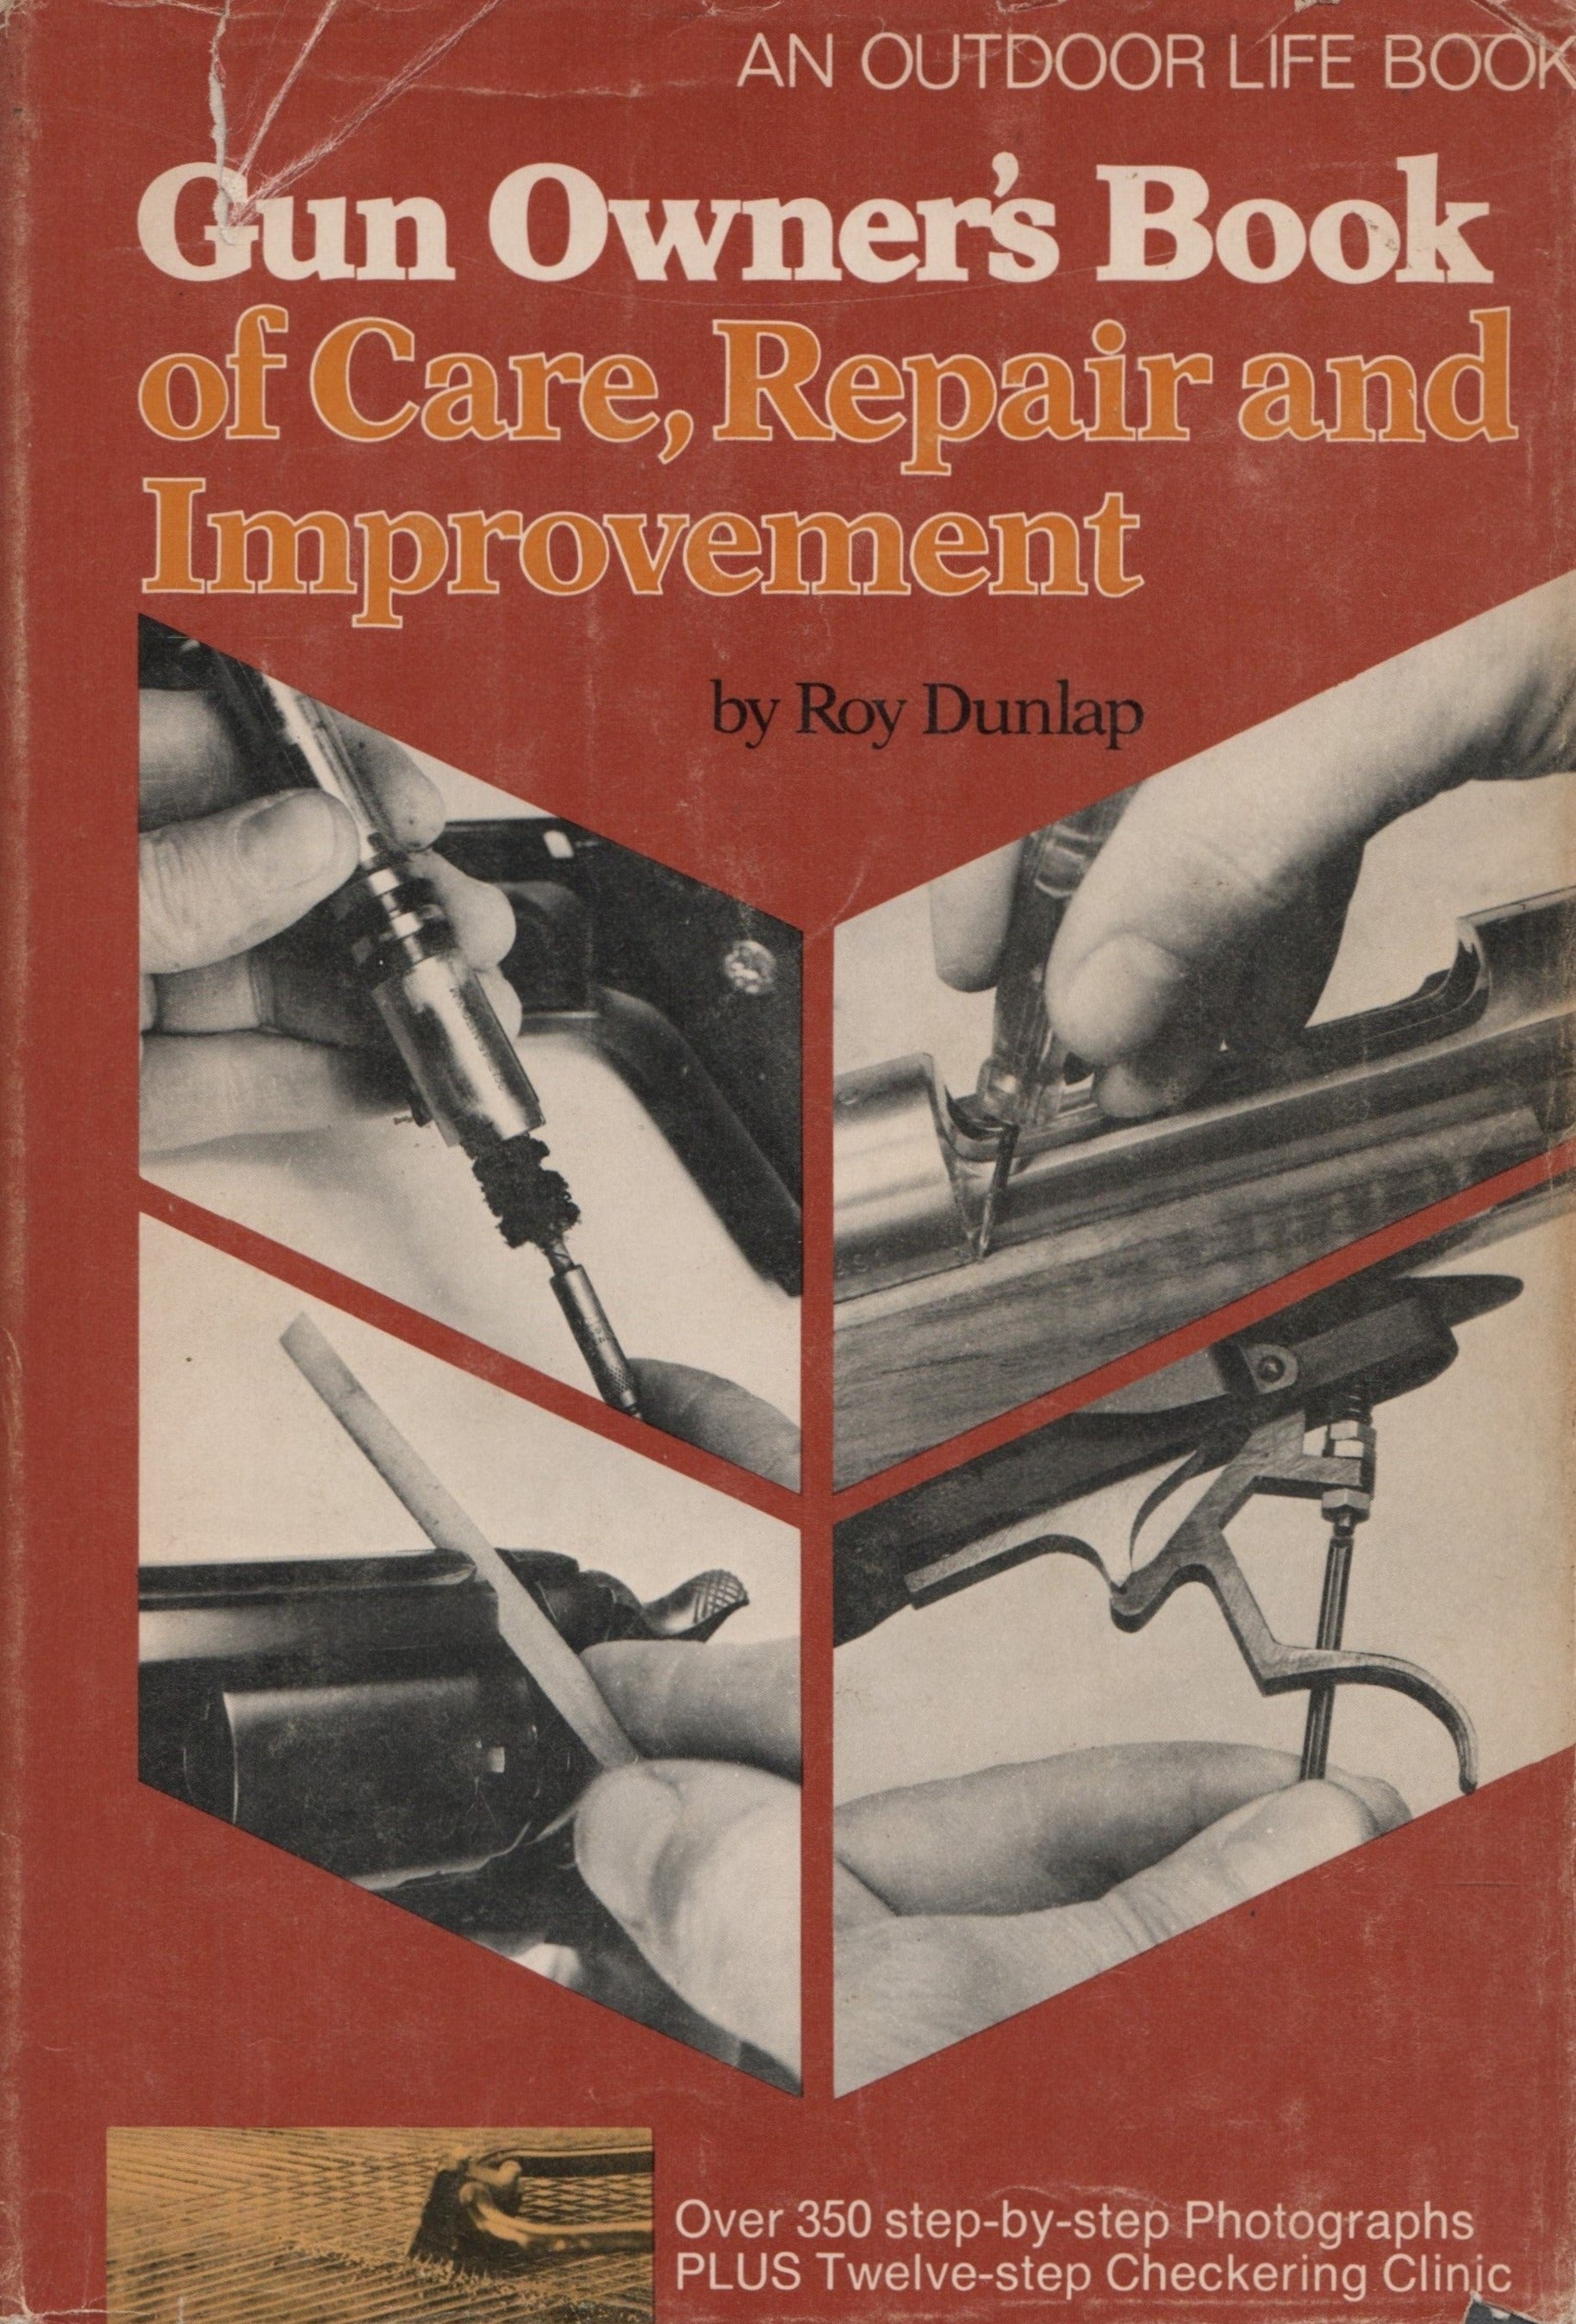 DUNLAP, ROY. Gun Owner's Book of Care, Repair and Improvement : And outdoor life book - Over 350 step-by-step Photographs PLUS Twelve-step Checkering Clinic